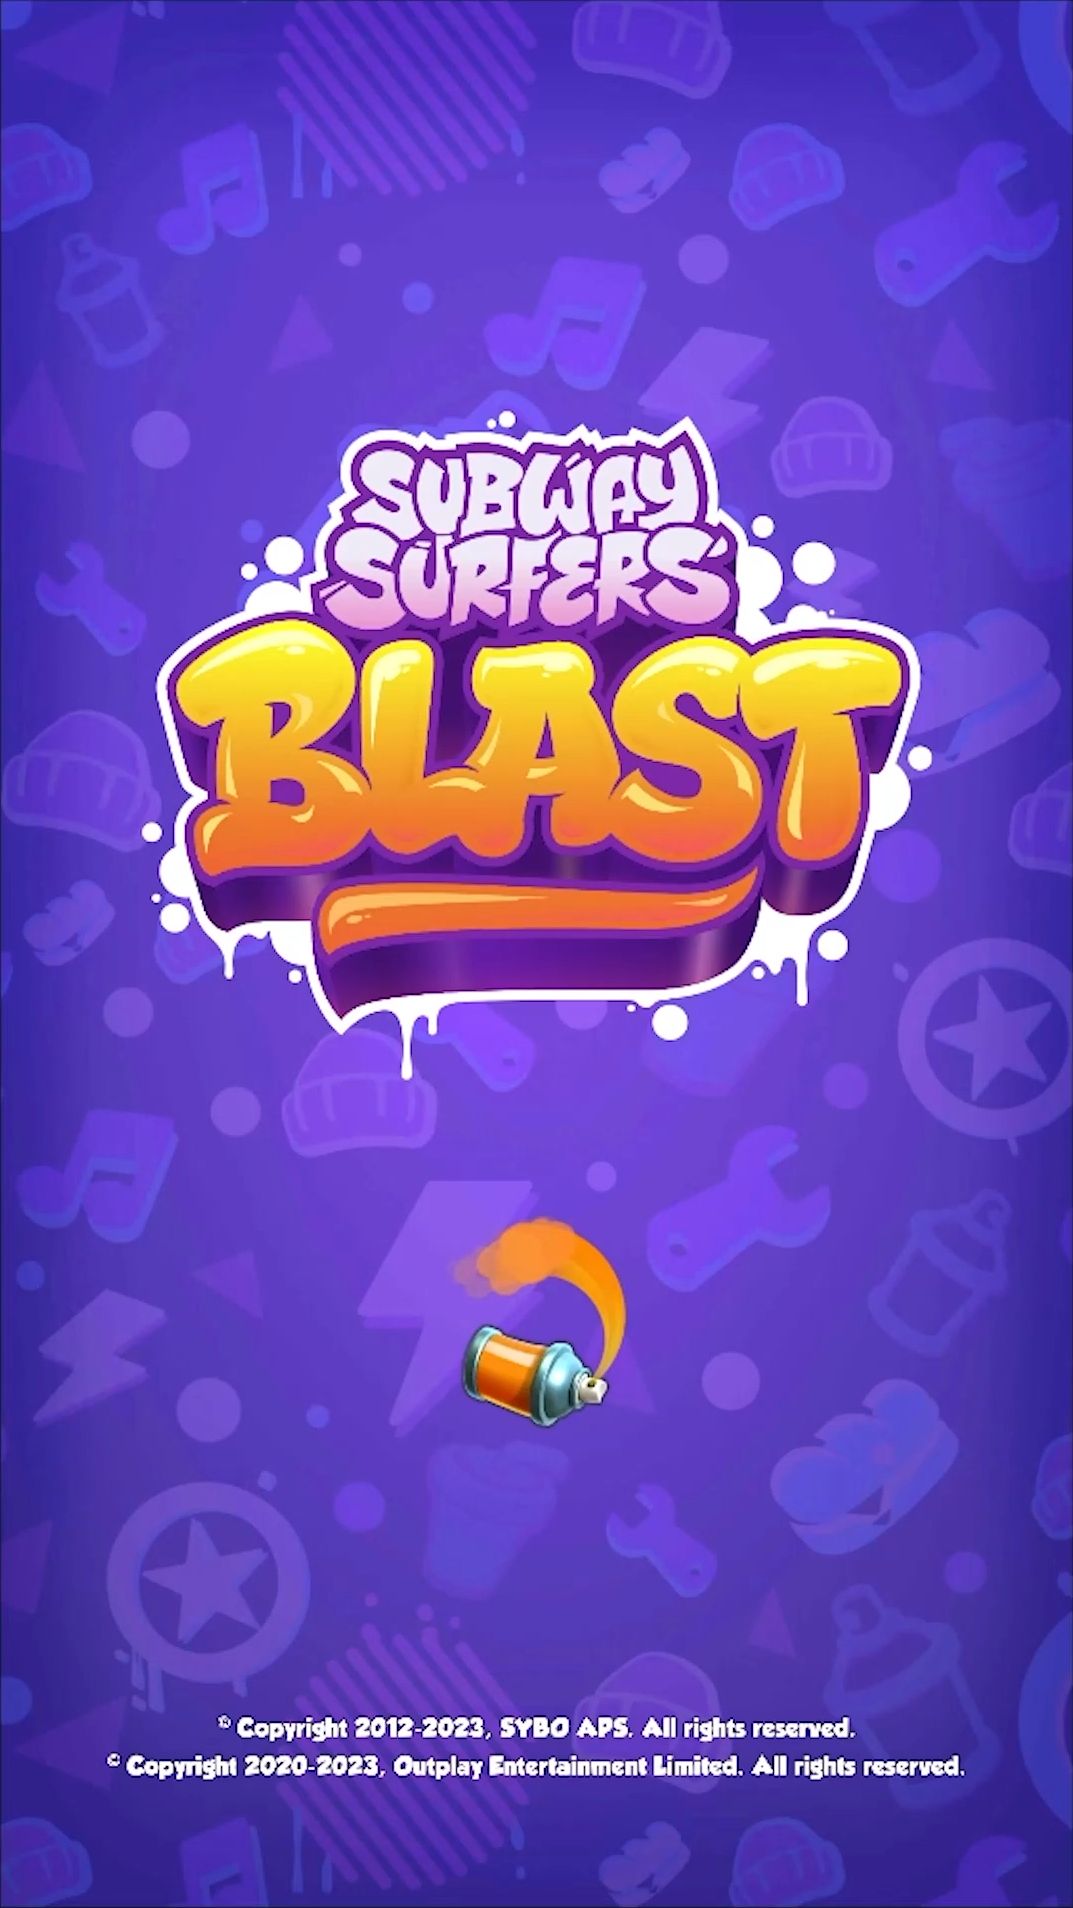 Full version of Android Logic game apk Subway Surfers Blast for tablet and phone.